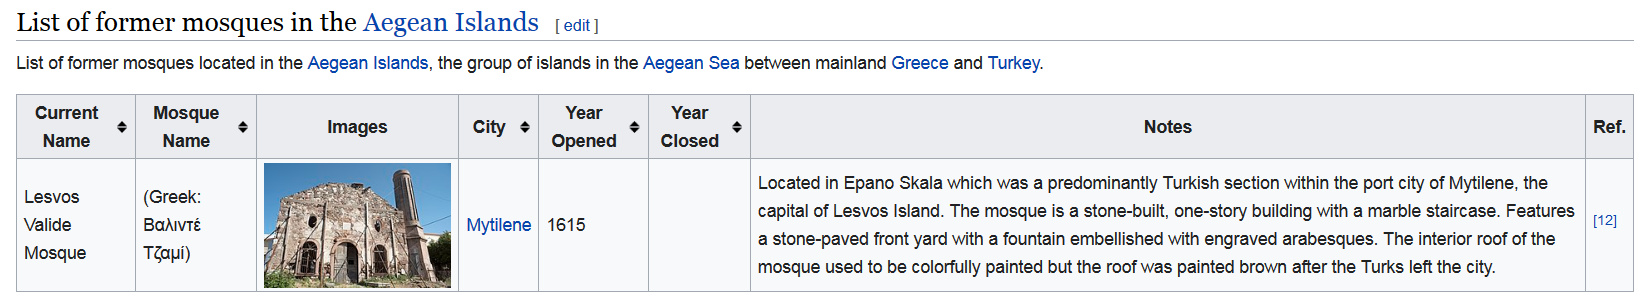 Screenshot_2022-04-06 List of former mosques in Greece - Wikipedia(4).png